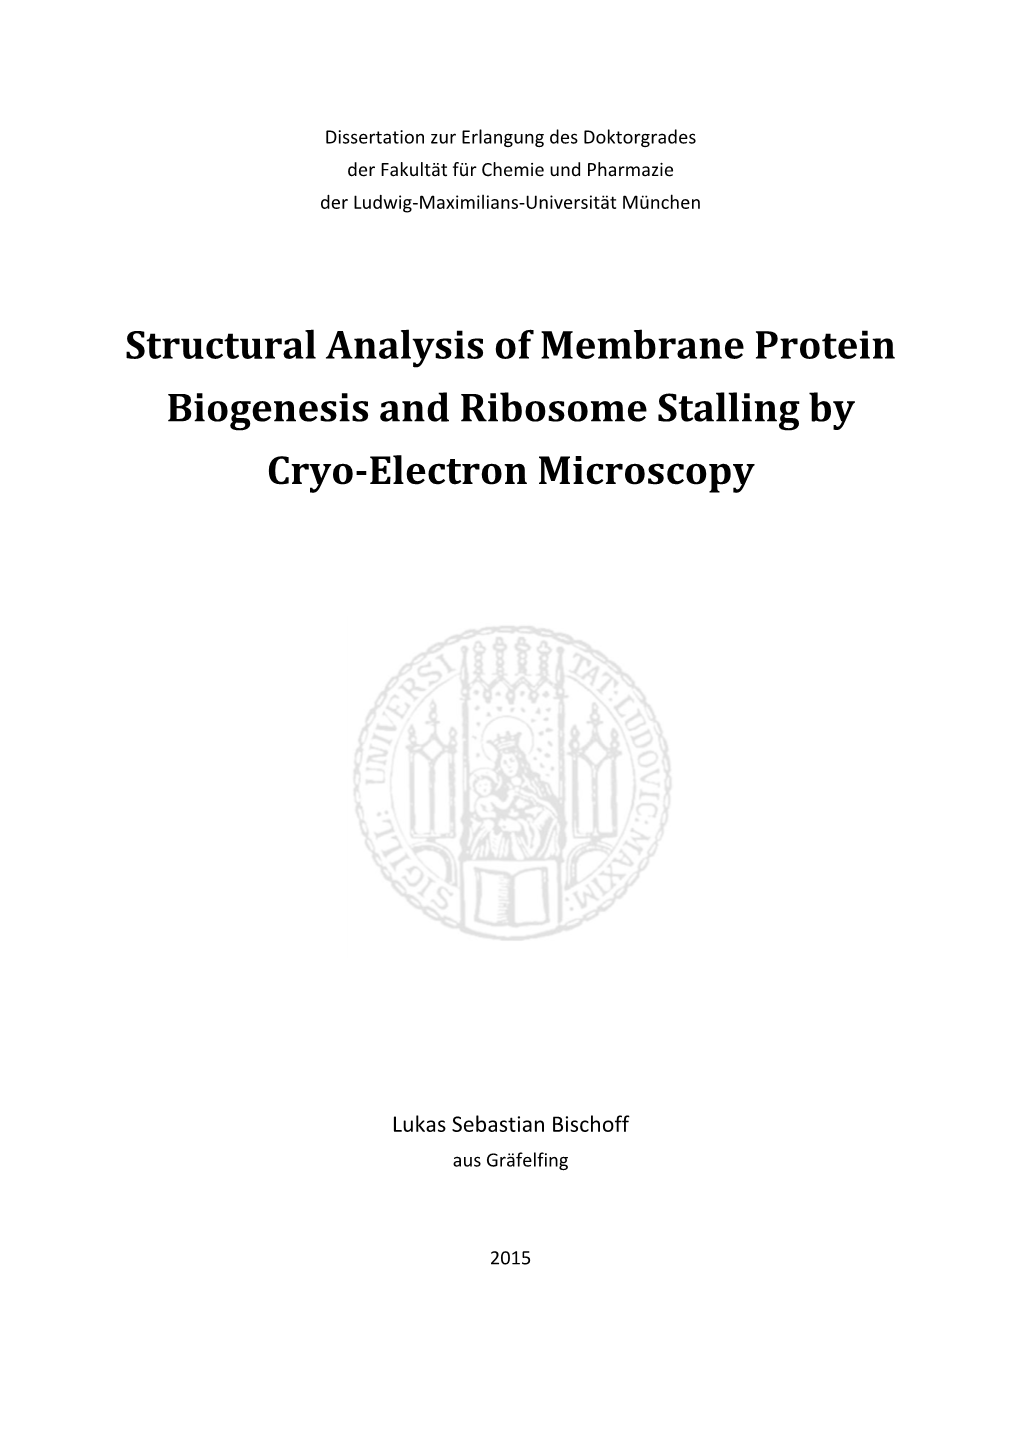 Structural Analysis of Membrane Protein Biogenesis and Ribosome Stalling by Cryo-Electron Microscopy